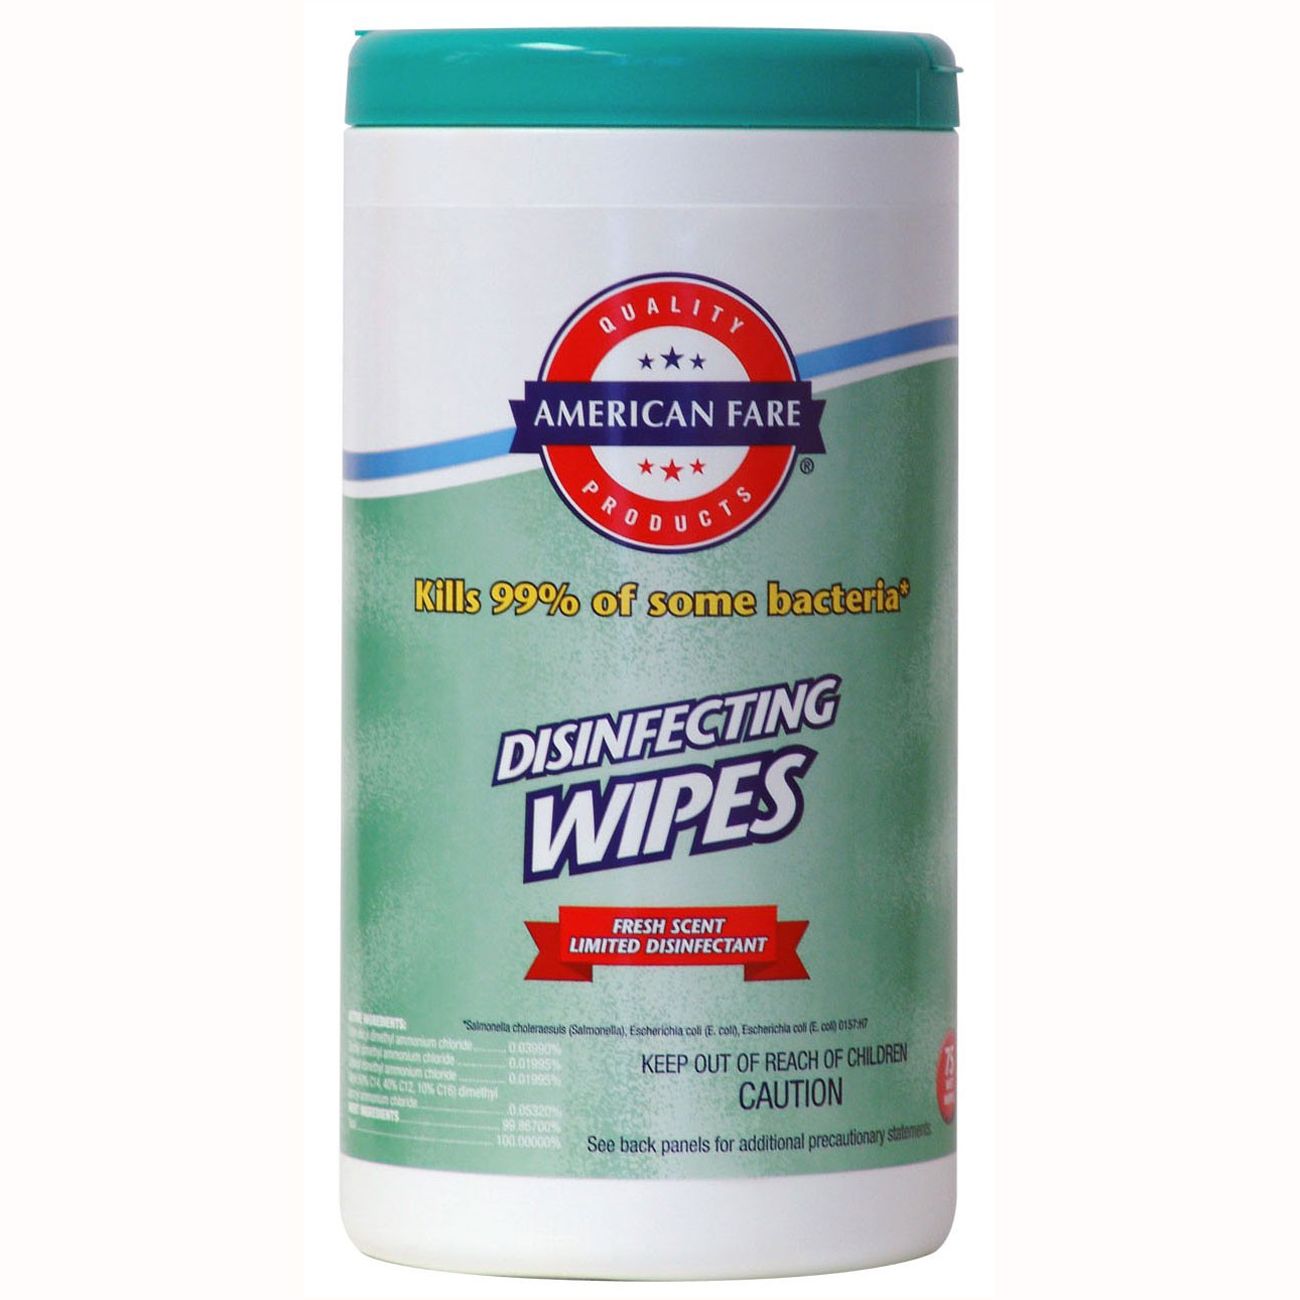 American Fare Disinfecting Wipes Fresh Scent 75 Count